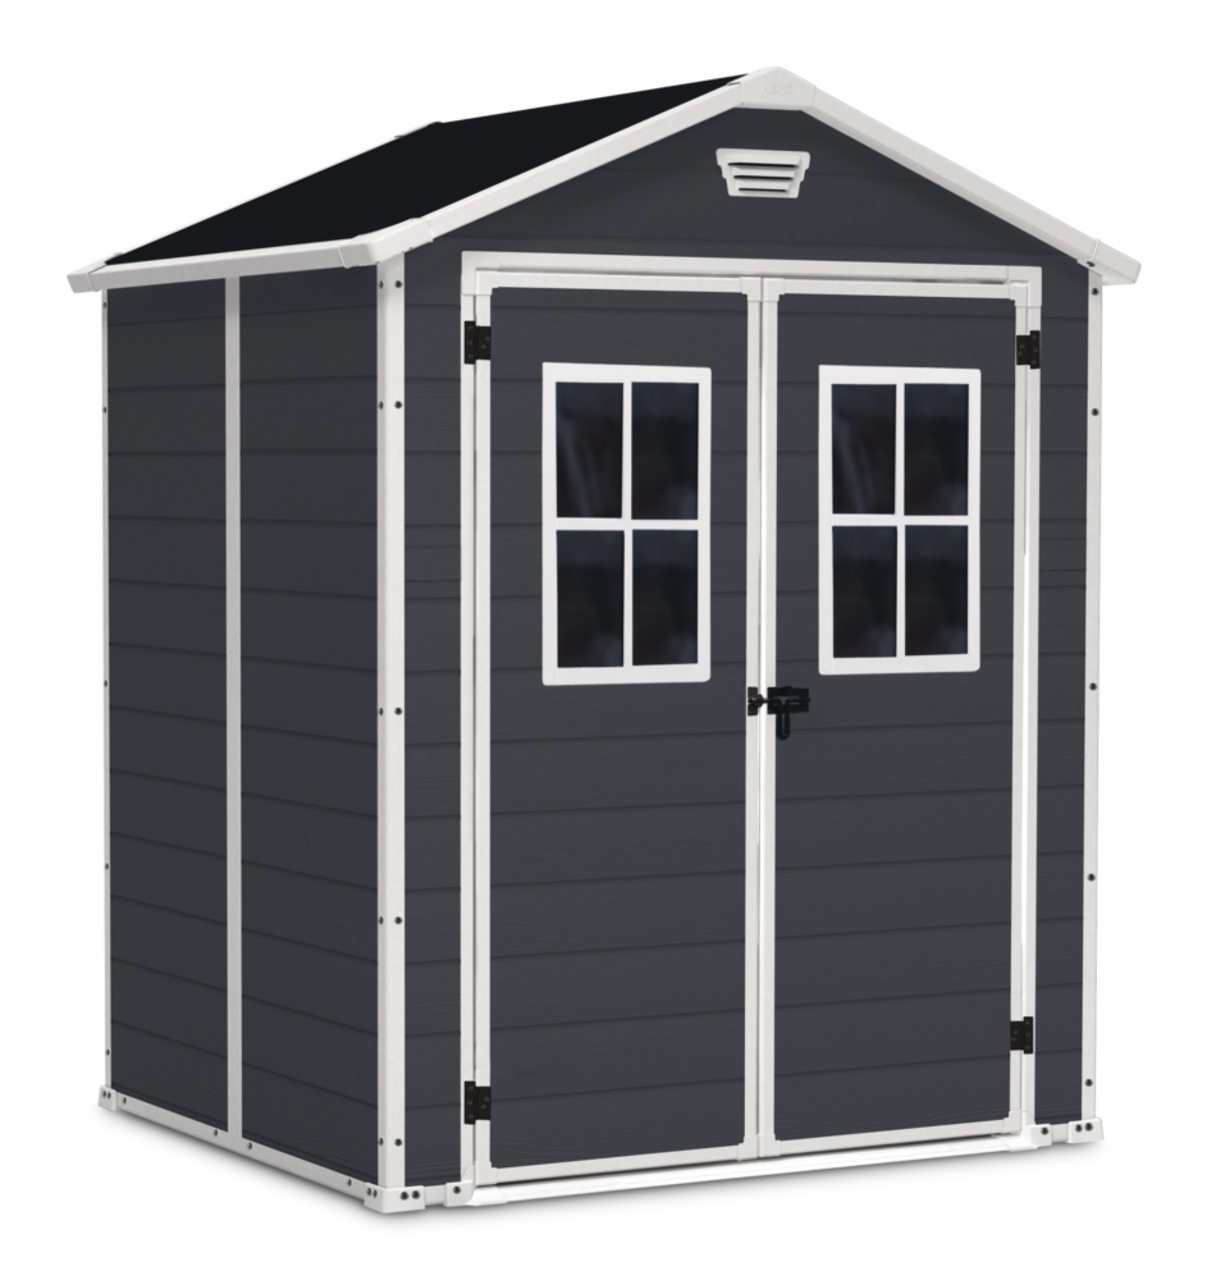 canadian tire outdoor sheds